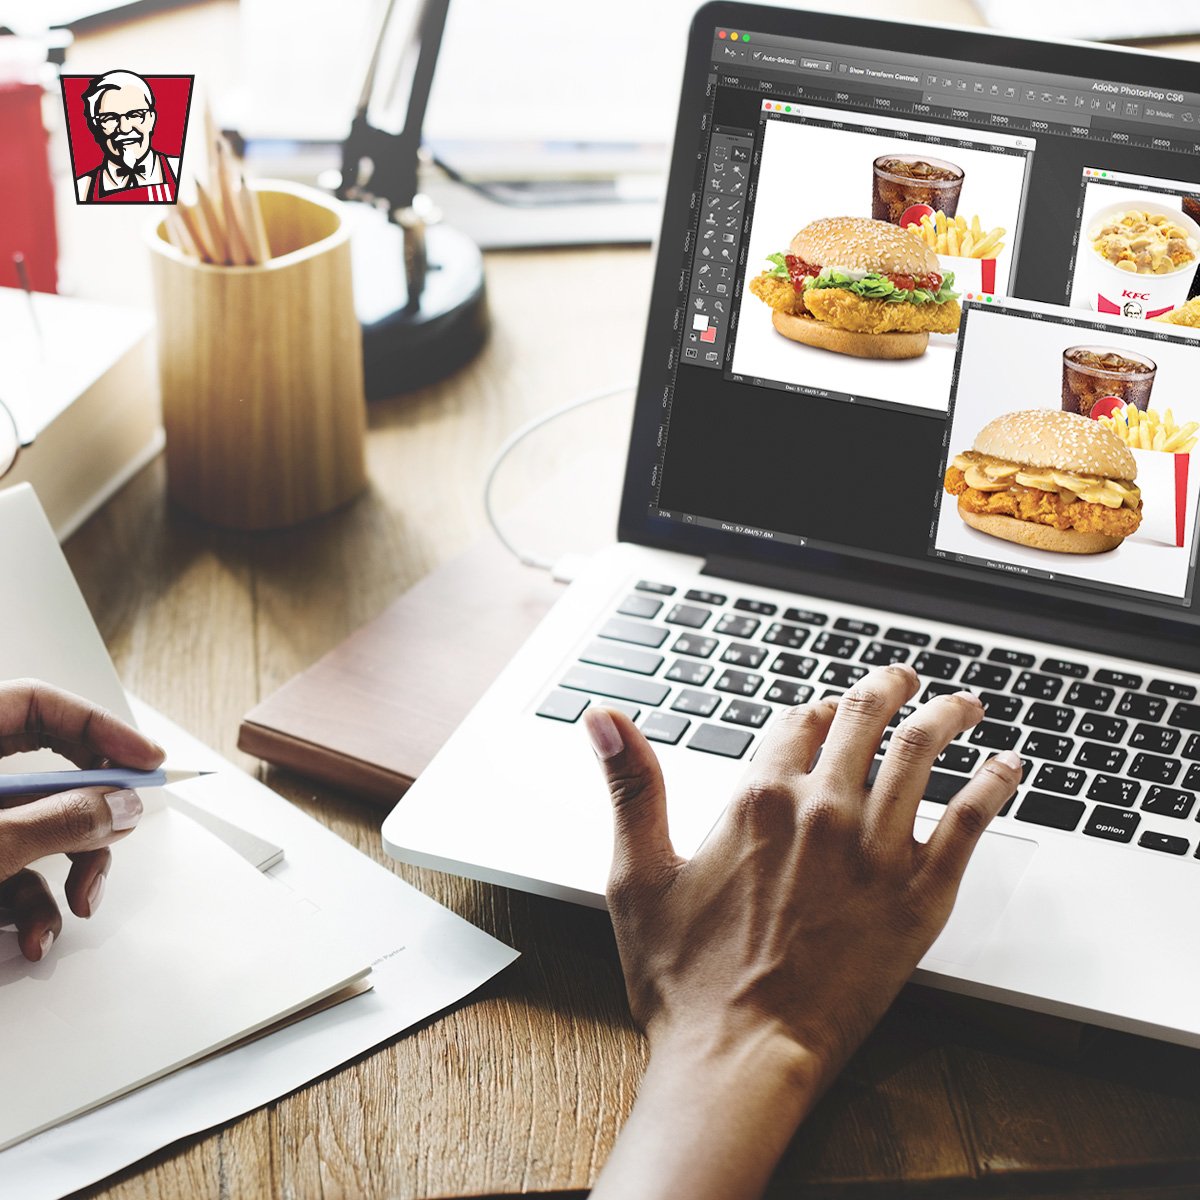 When you're rushing that creative artwork but all you can think of is #KFCSuperValue5 meals. #kfcsg